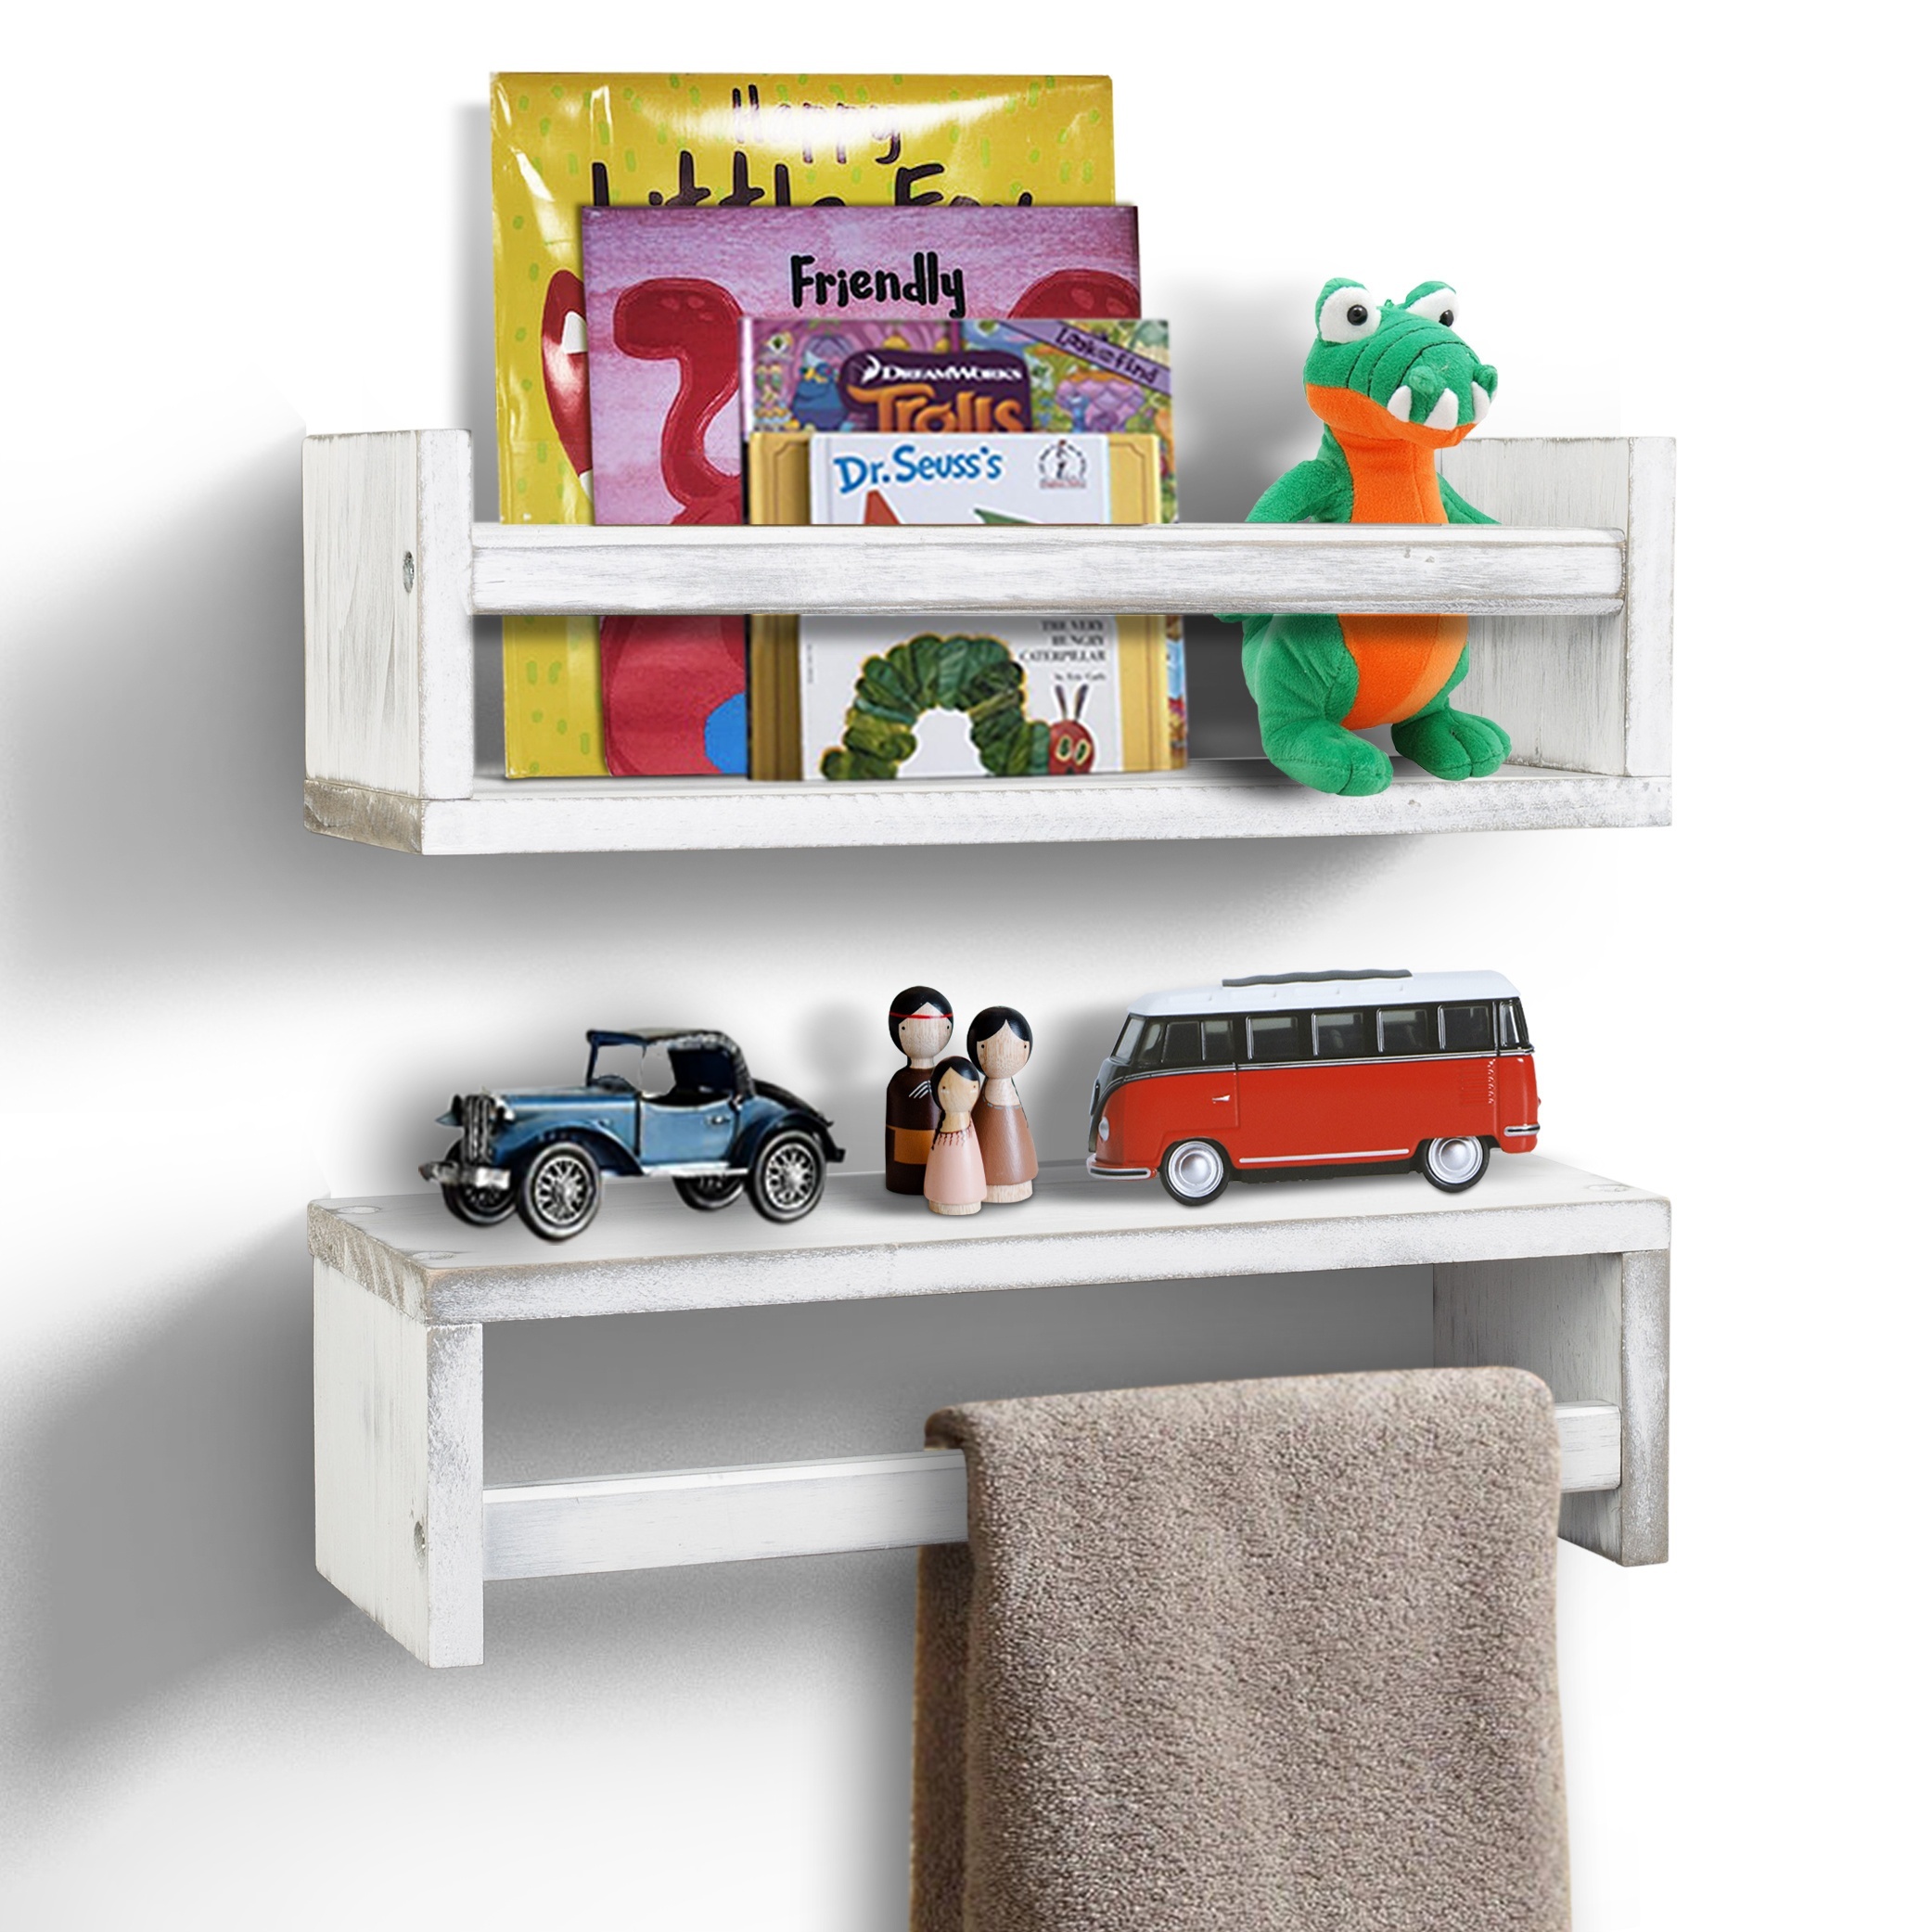 Bestier 38 inch Wall Mounted Floating Shelves with Towel Bar & Hooks  Bookshelf in Rustic 